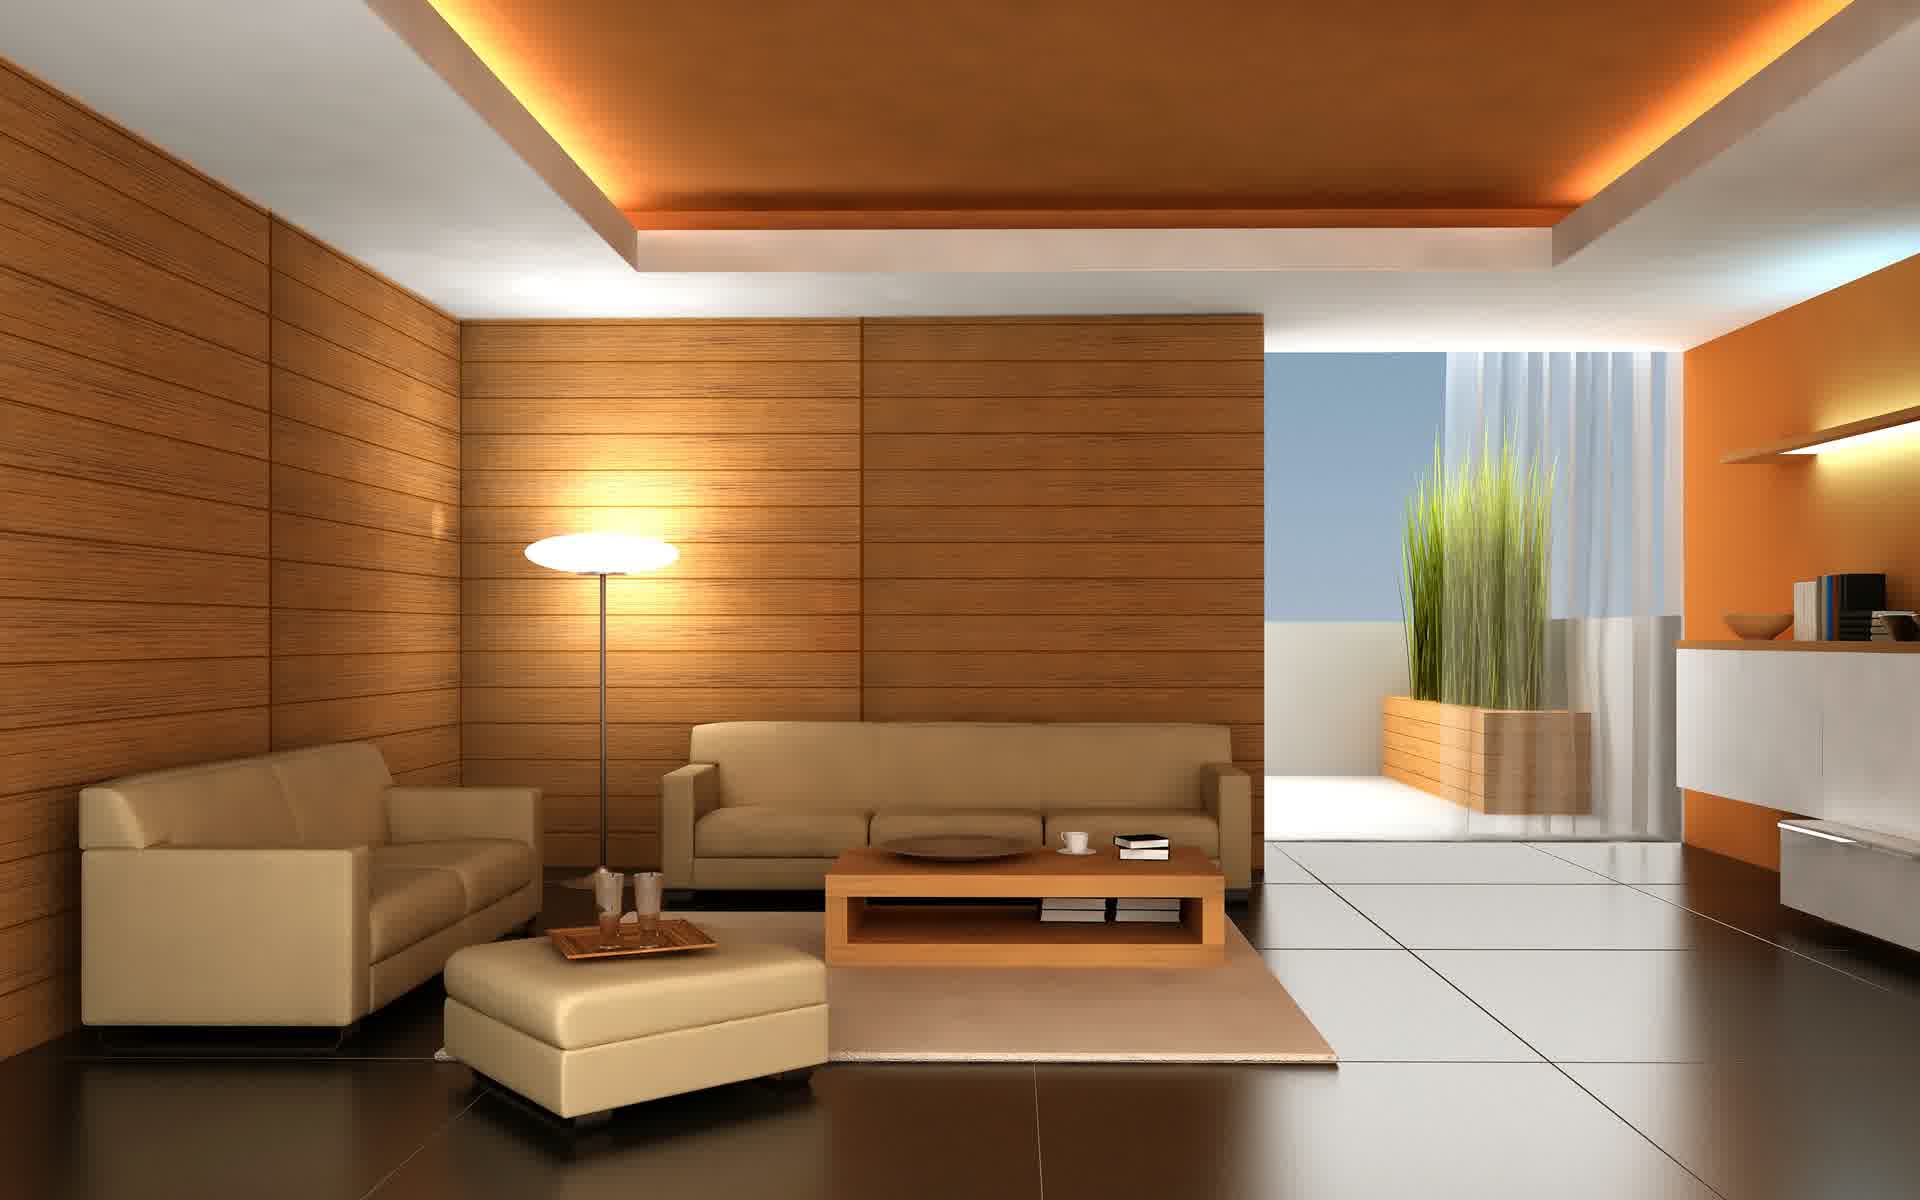 Modern Interior Design With Sofa And Wood Wall With Modern Floor And Lighting Interior Design